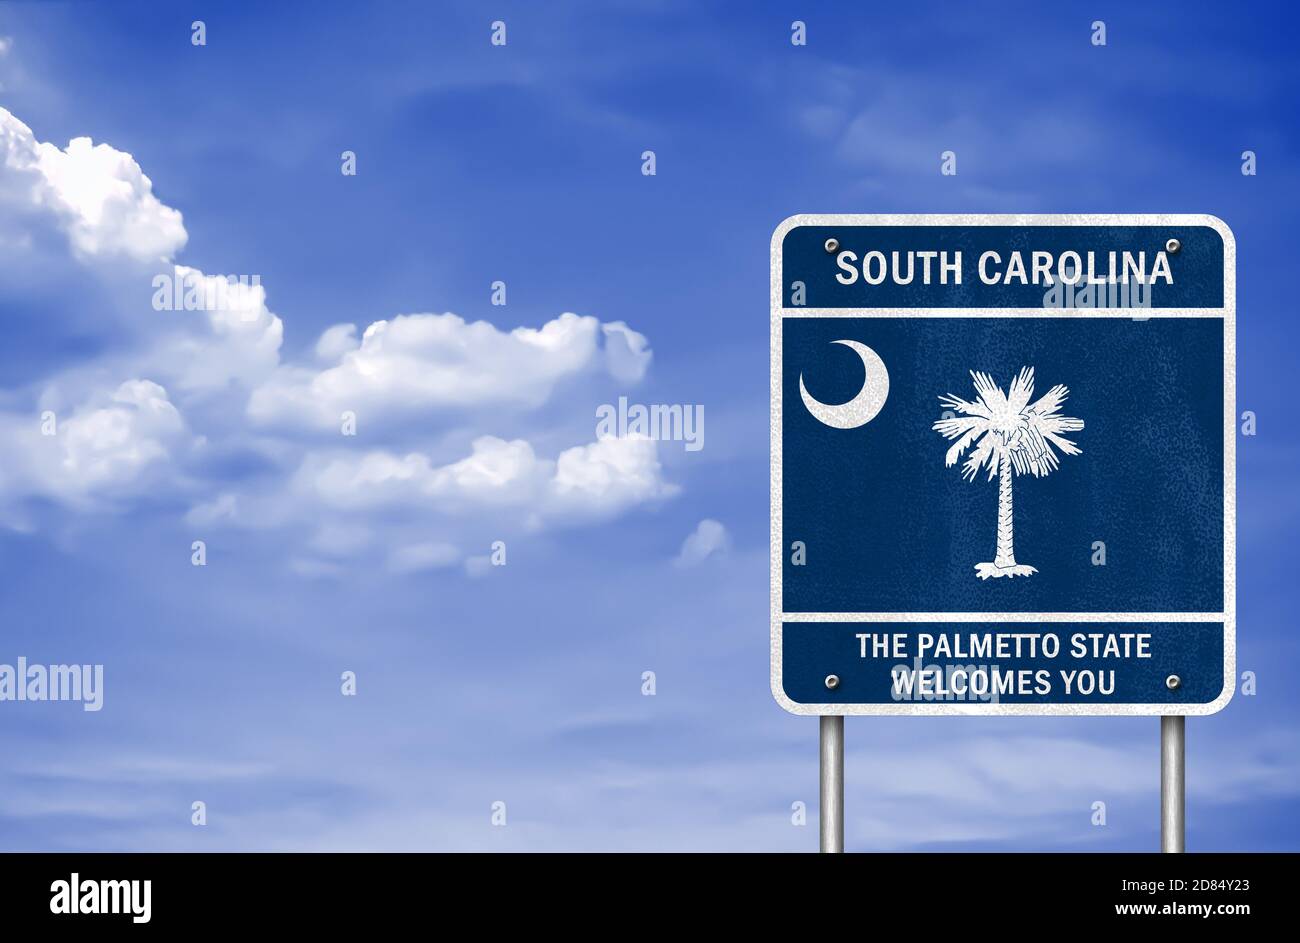 Welcome to South Carolina state Stock Photo